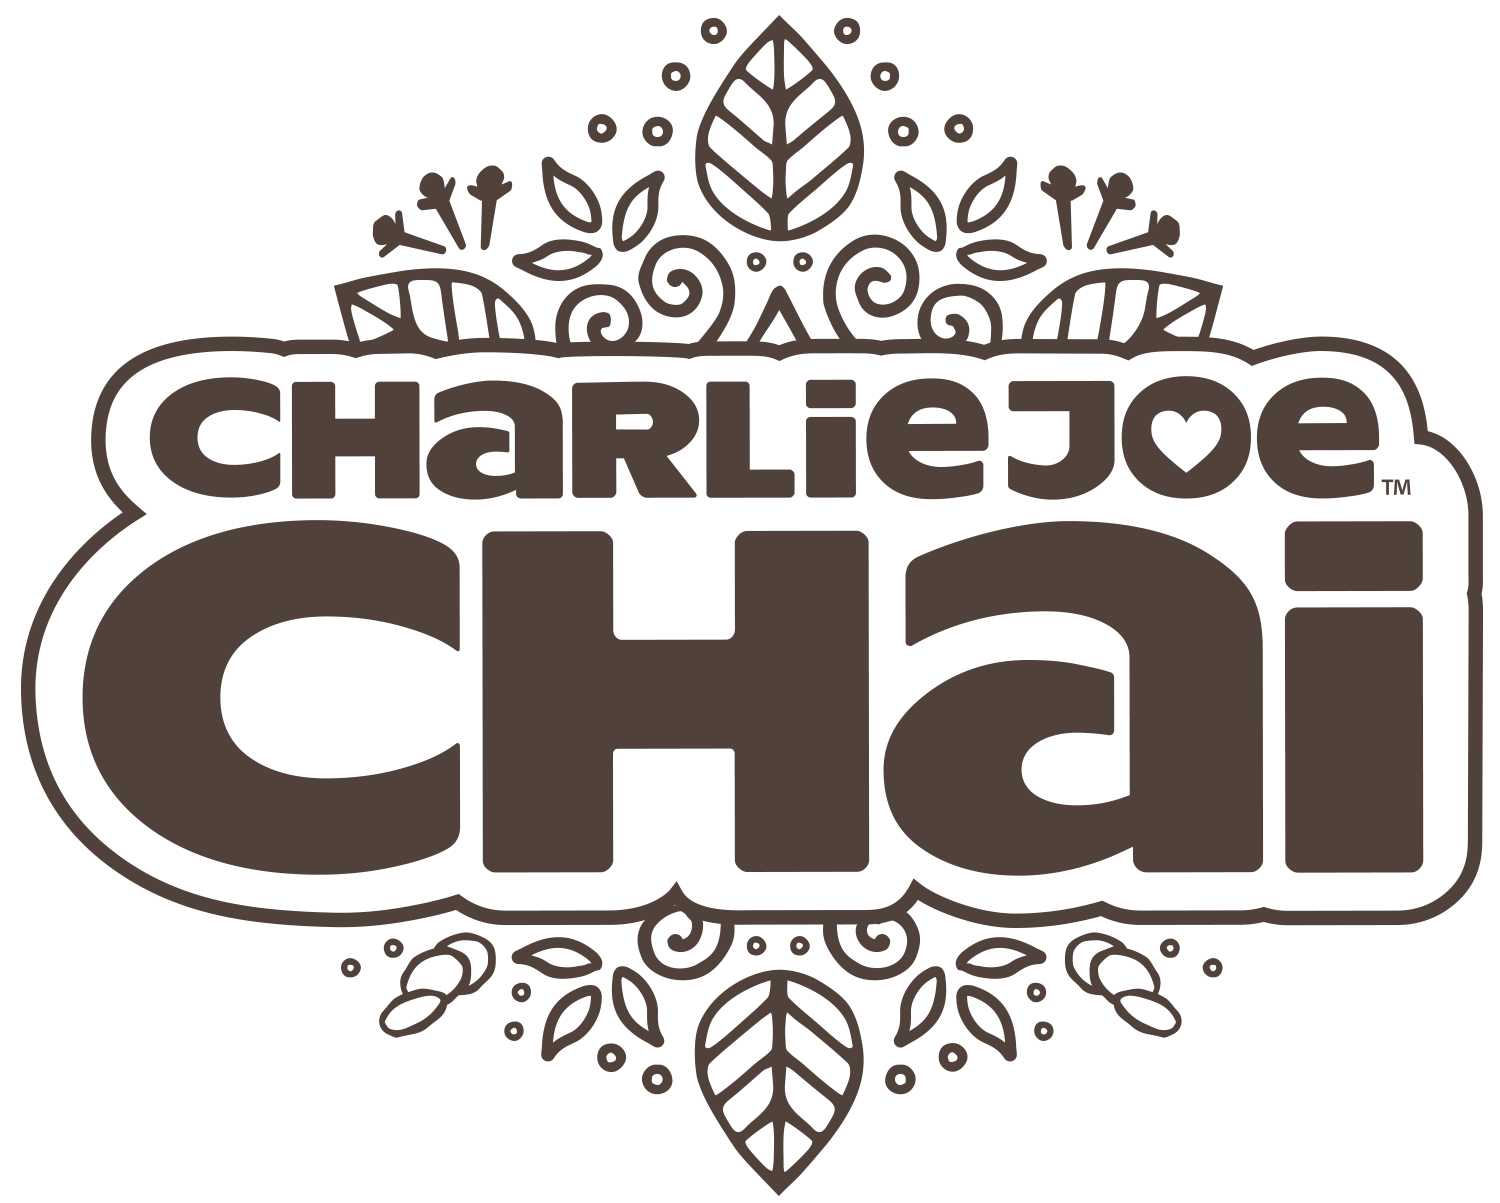 A brown and green logo for charlie choo chai.